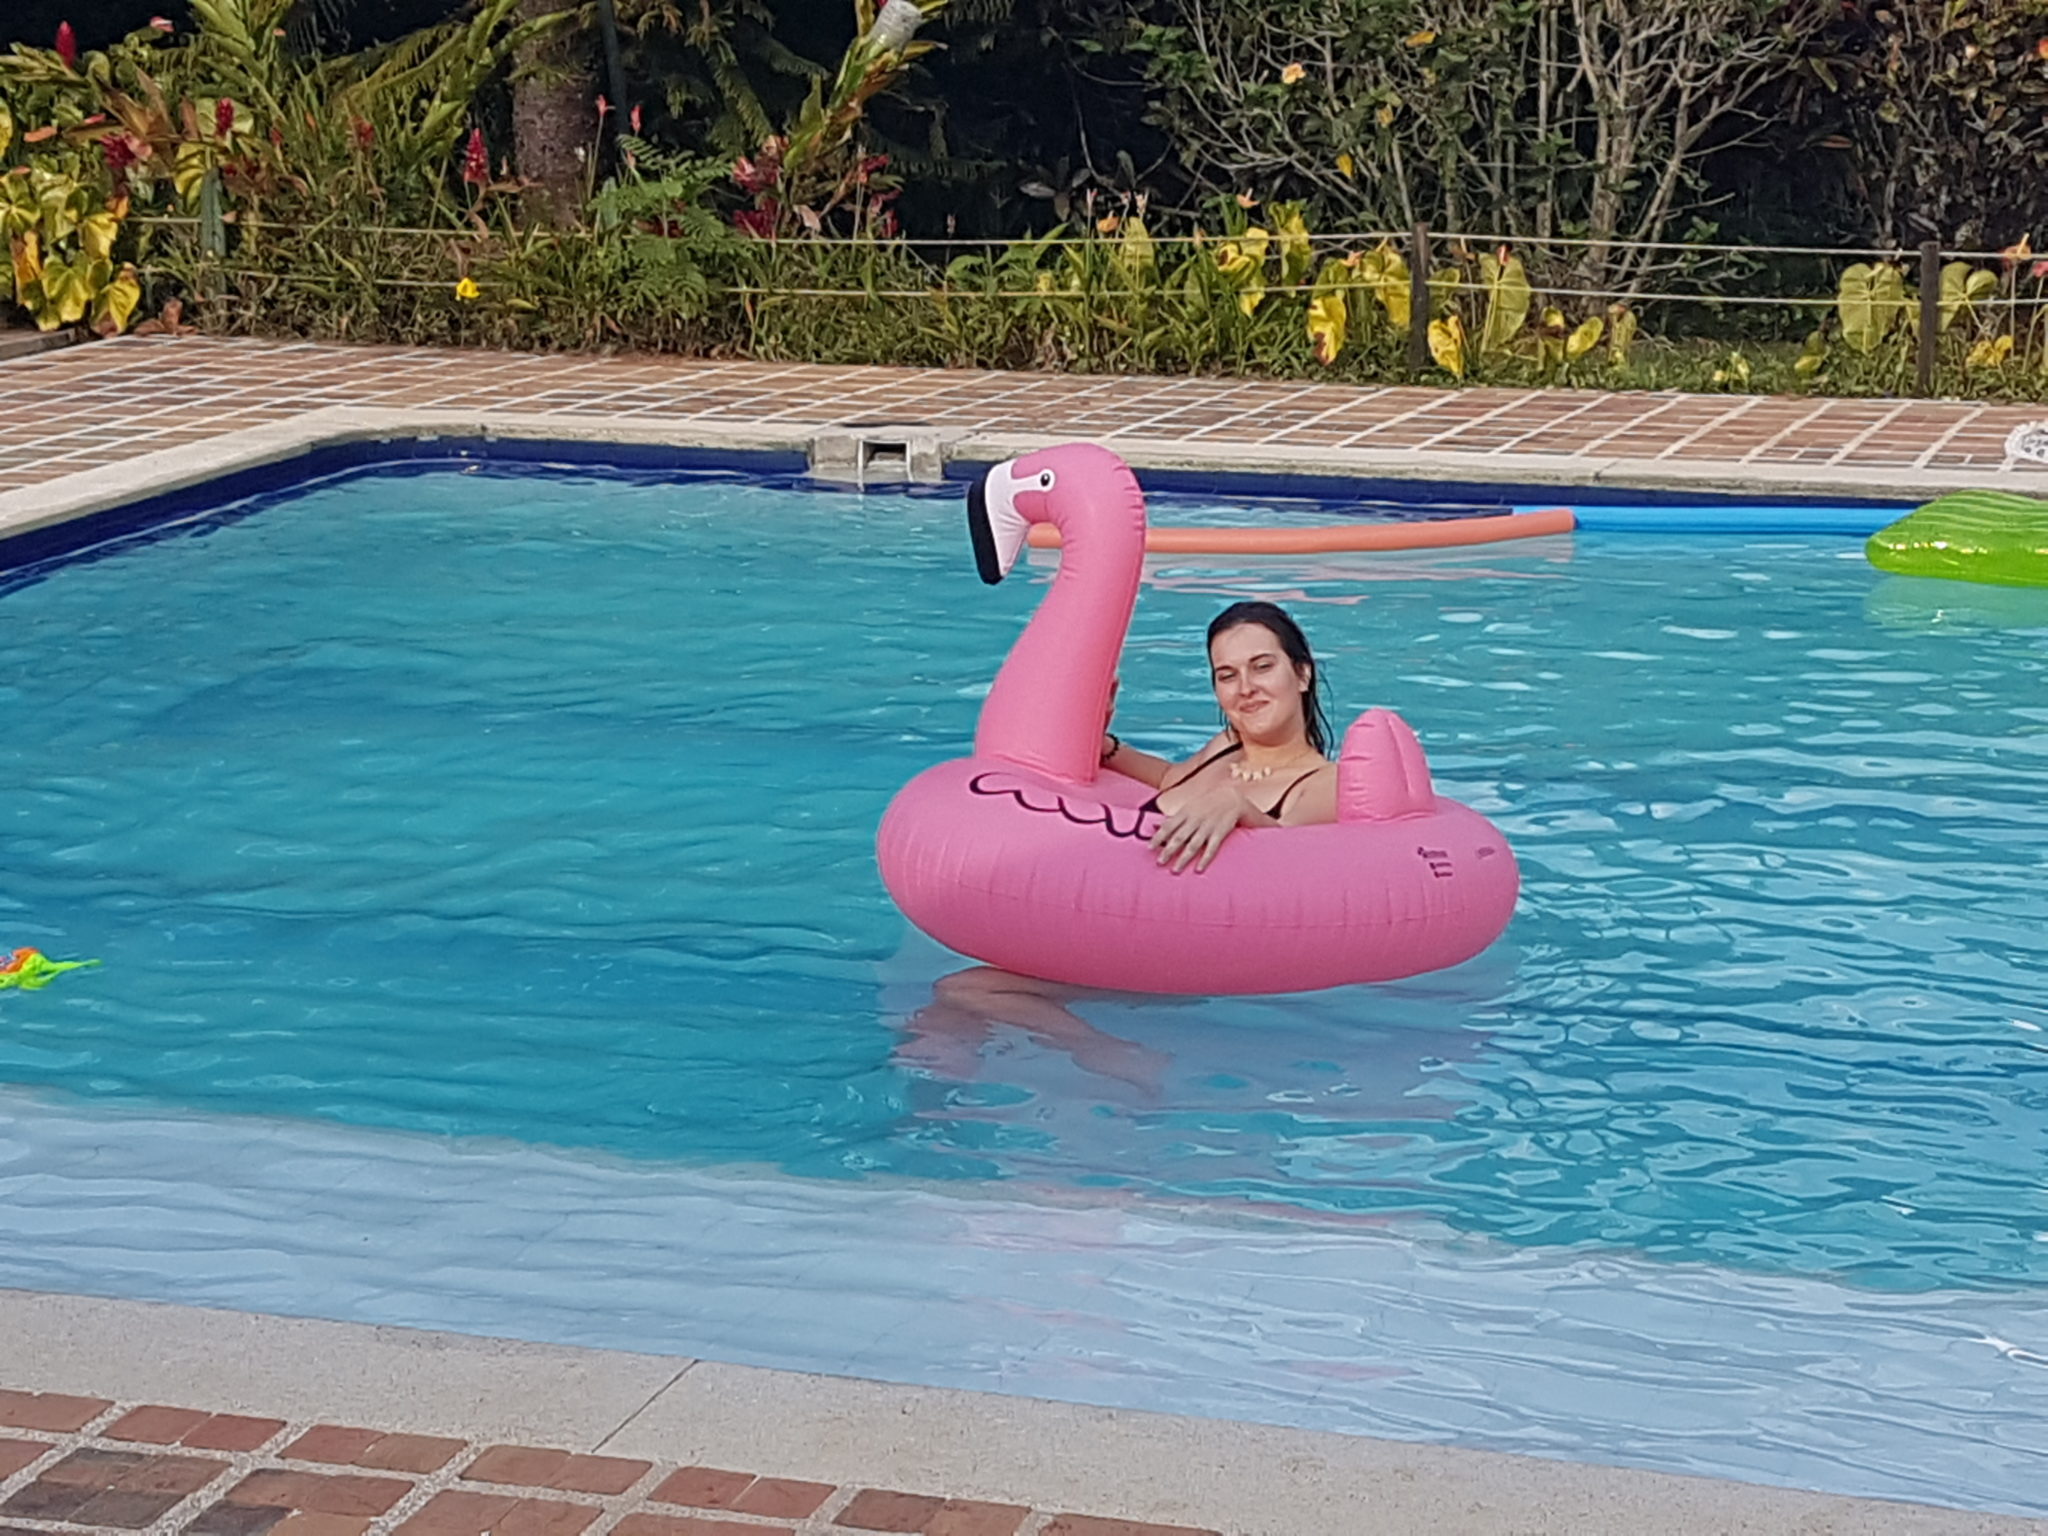 Aggie in the Pool at the Finca in a Swan Floatie